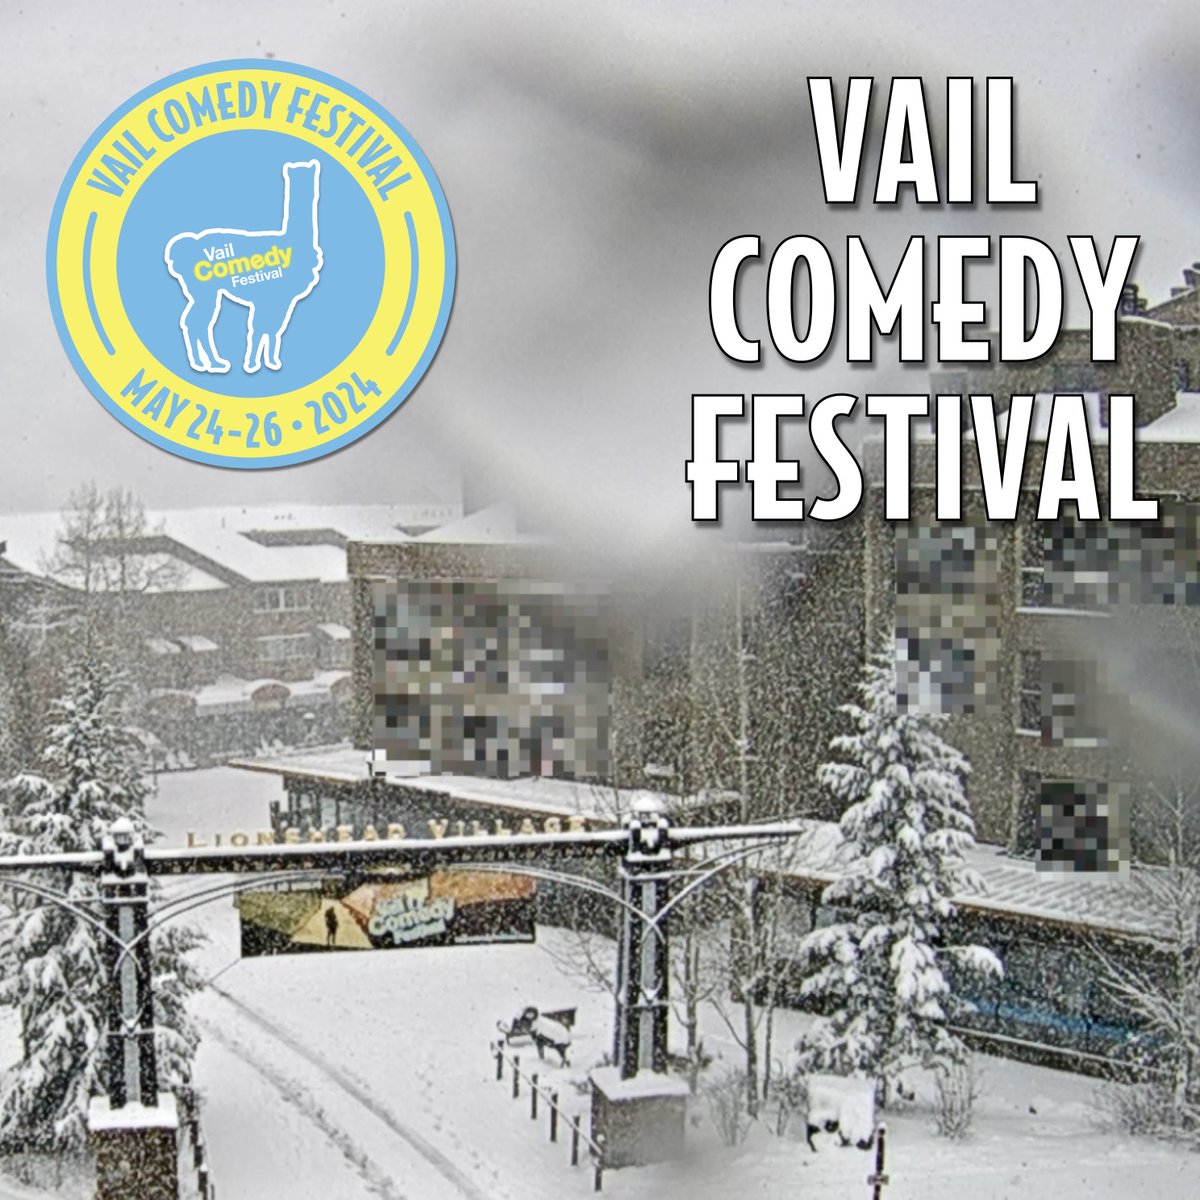 Yesterday was a SNOW day for the Vail Comedy Festival banner in Lionshead.  Will we be warm and sunny in just a couple weeks for Memorial Day Weekend?  Tradition says yes, we will have our 👀 open